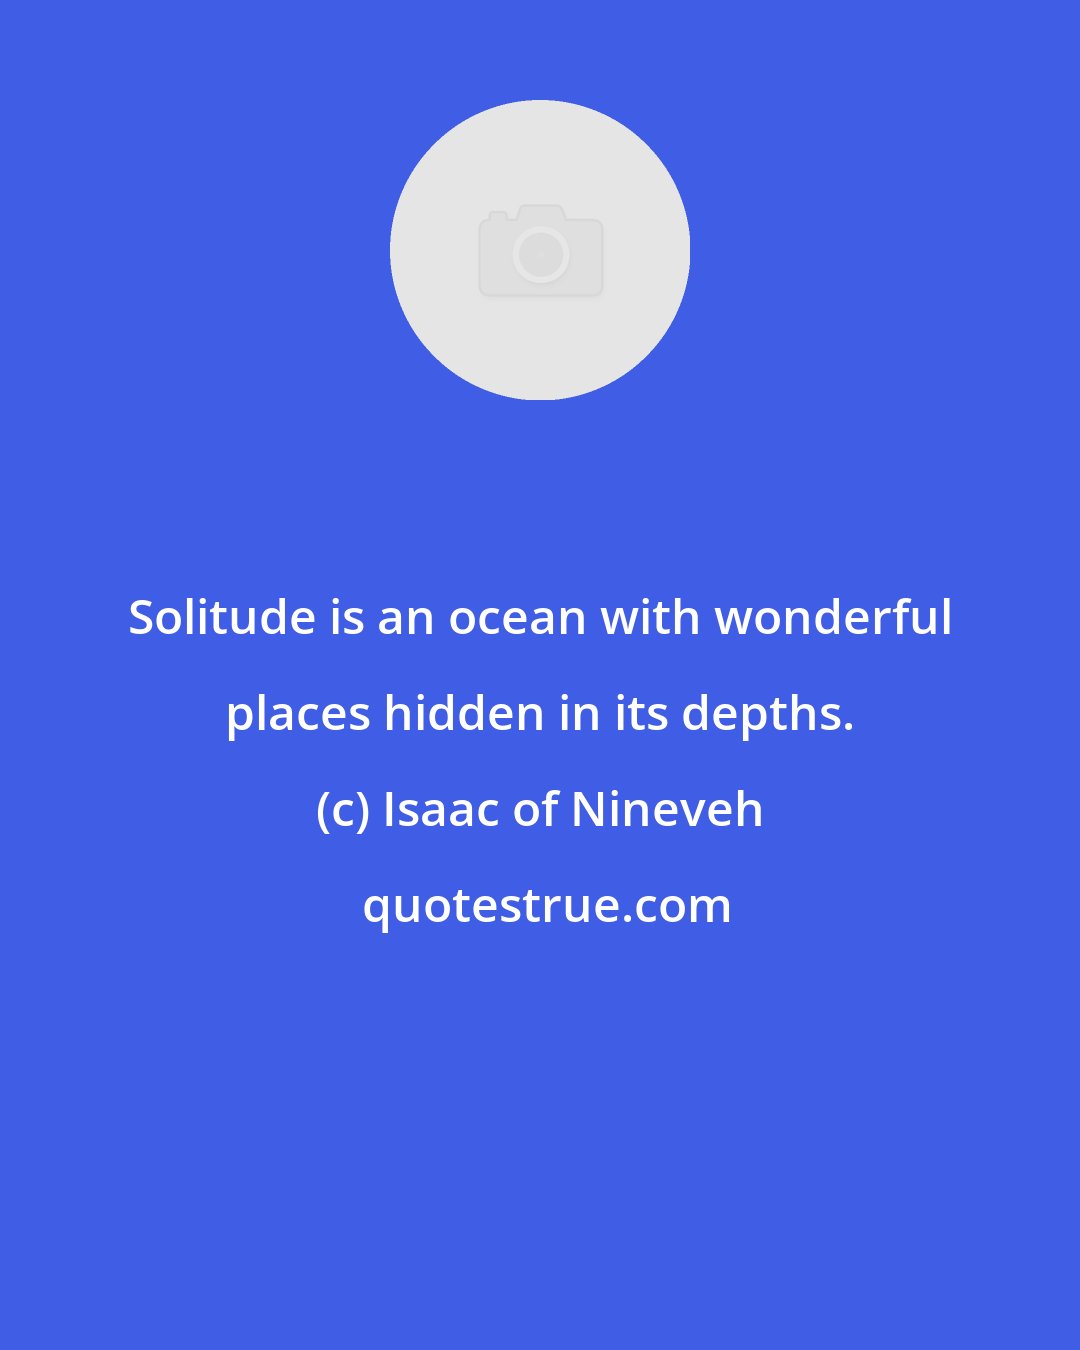 Isaac of Nineveh: Solitude is an ocean with wonderful places hidden in its depths.